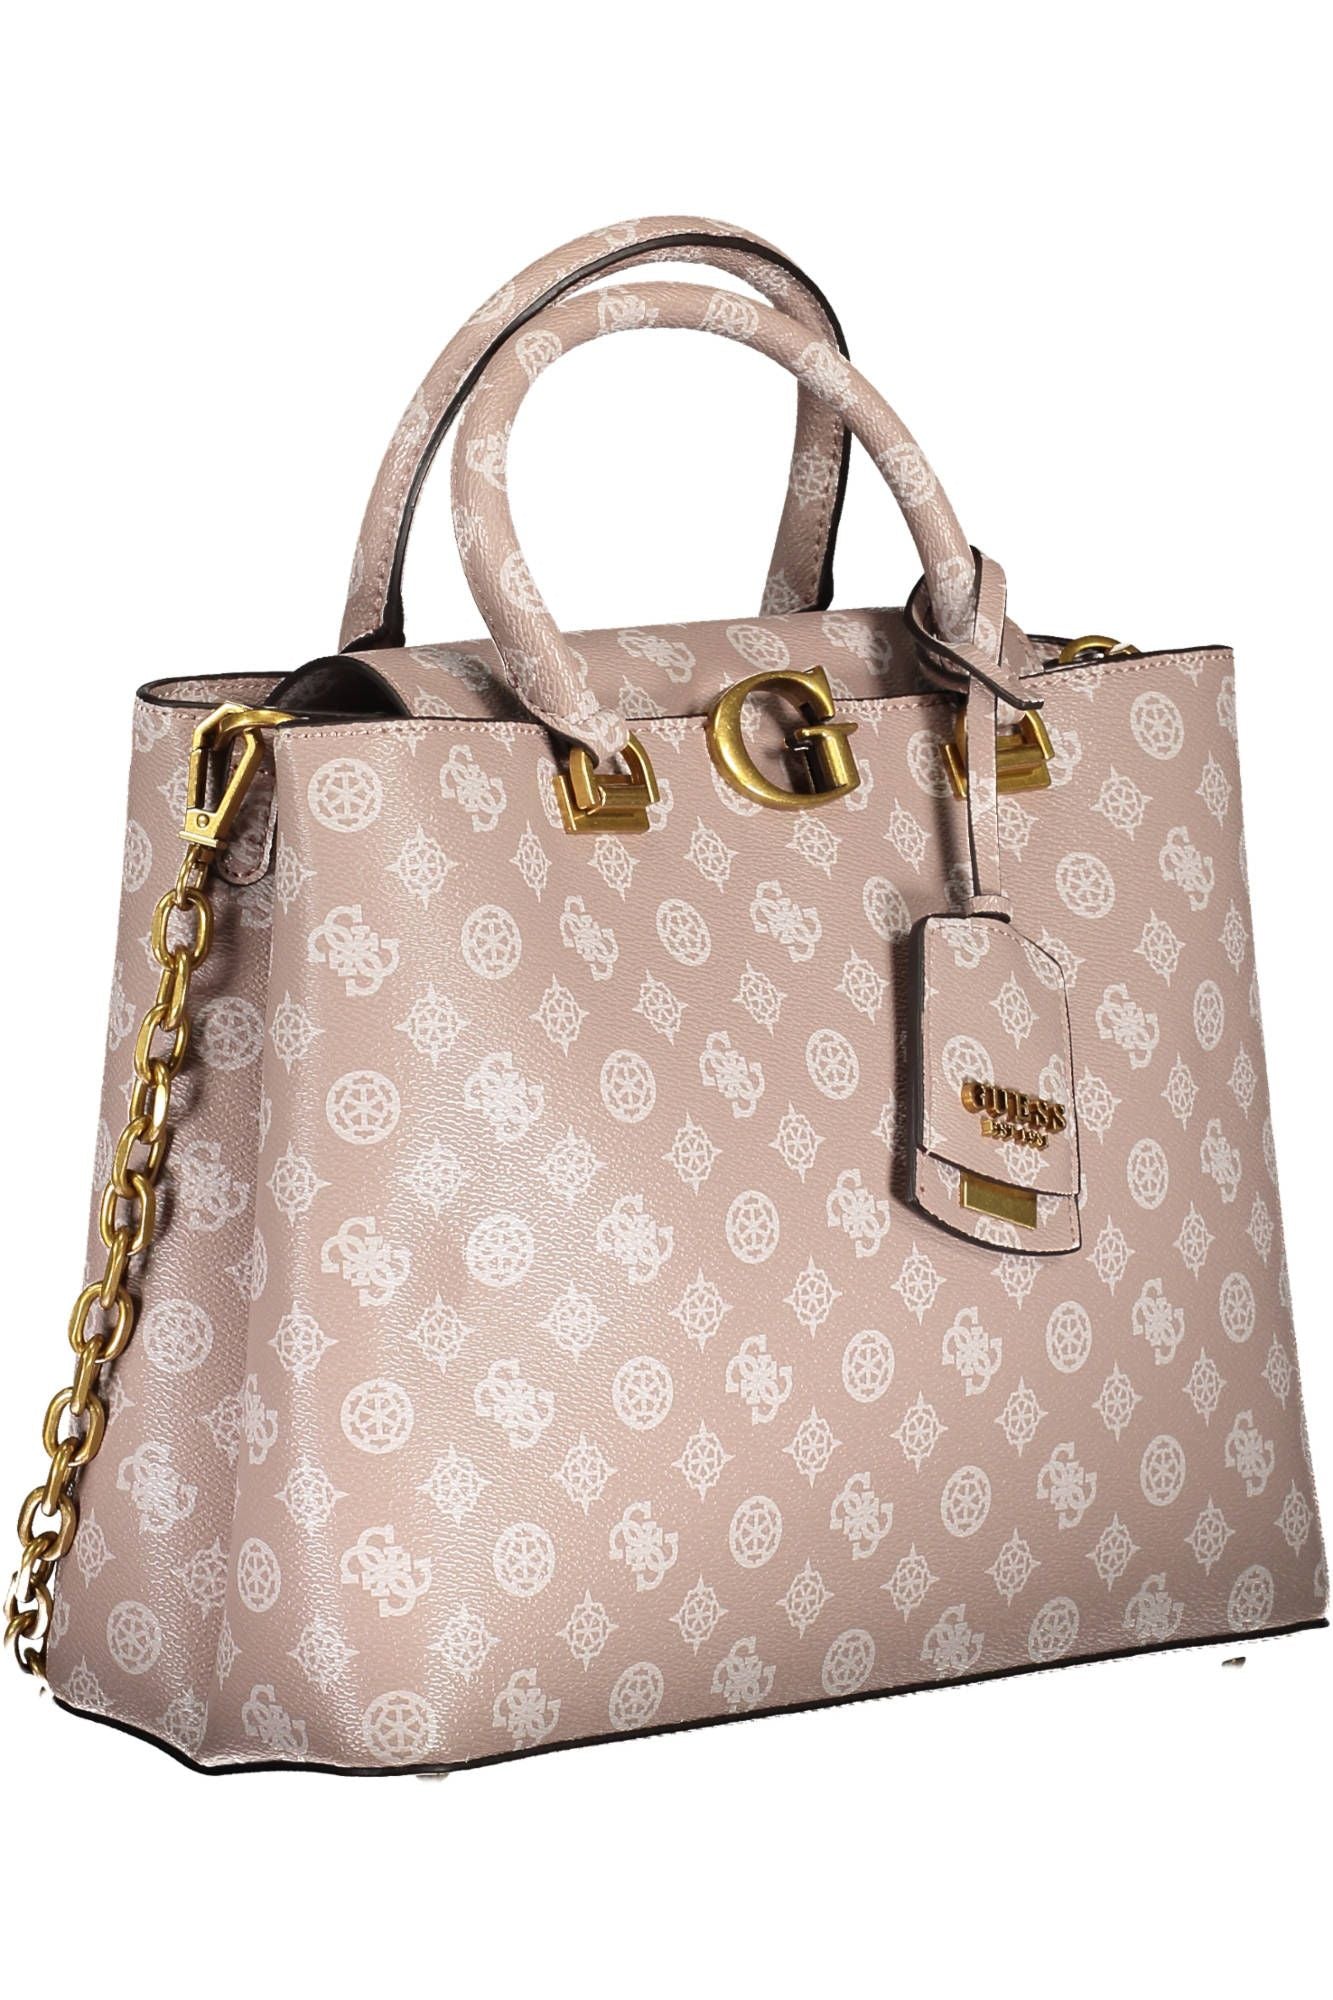 Chic Pink Two-Handle Guess Handbag with Chain Strap